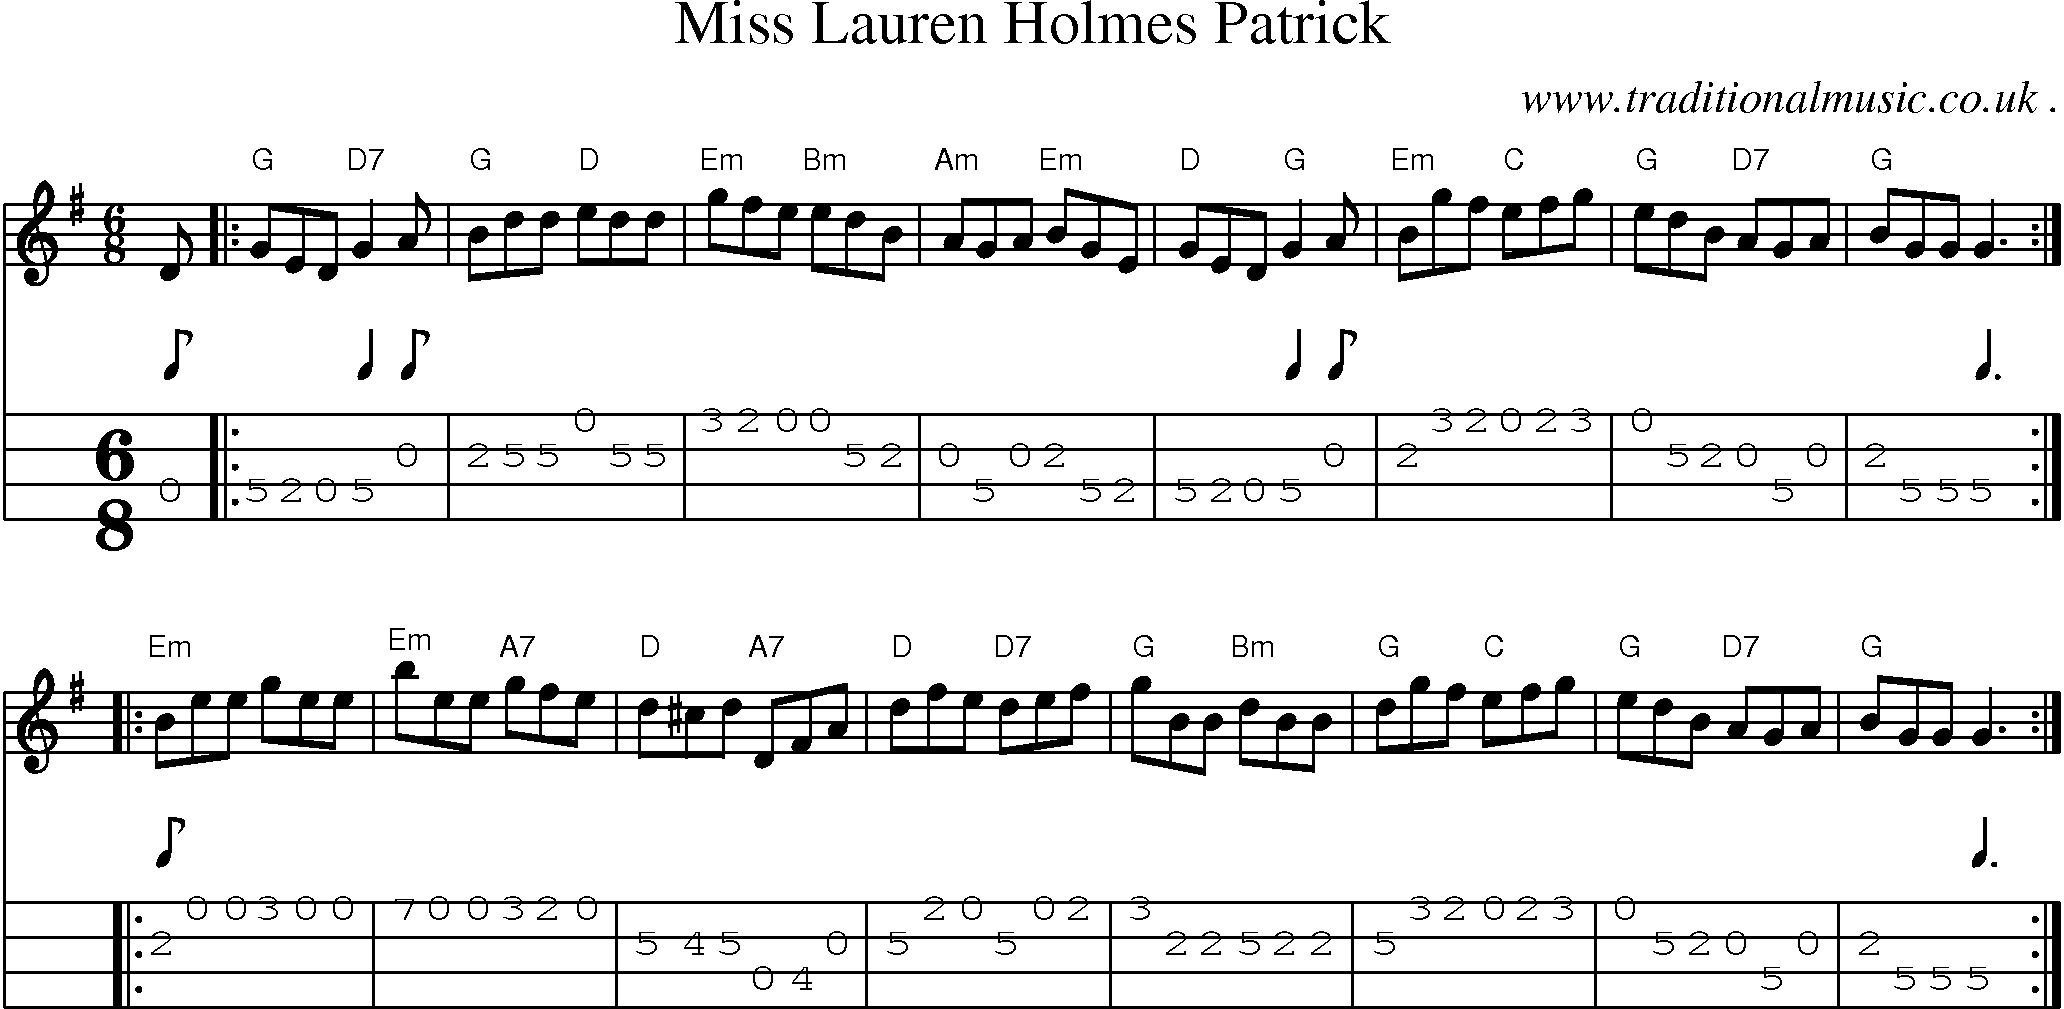 Sheet-music  score, Chords and Mandolin Tabs for Miss Lauren Holmes Patrick